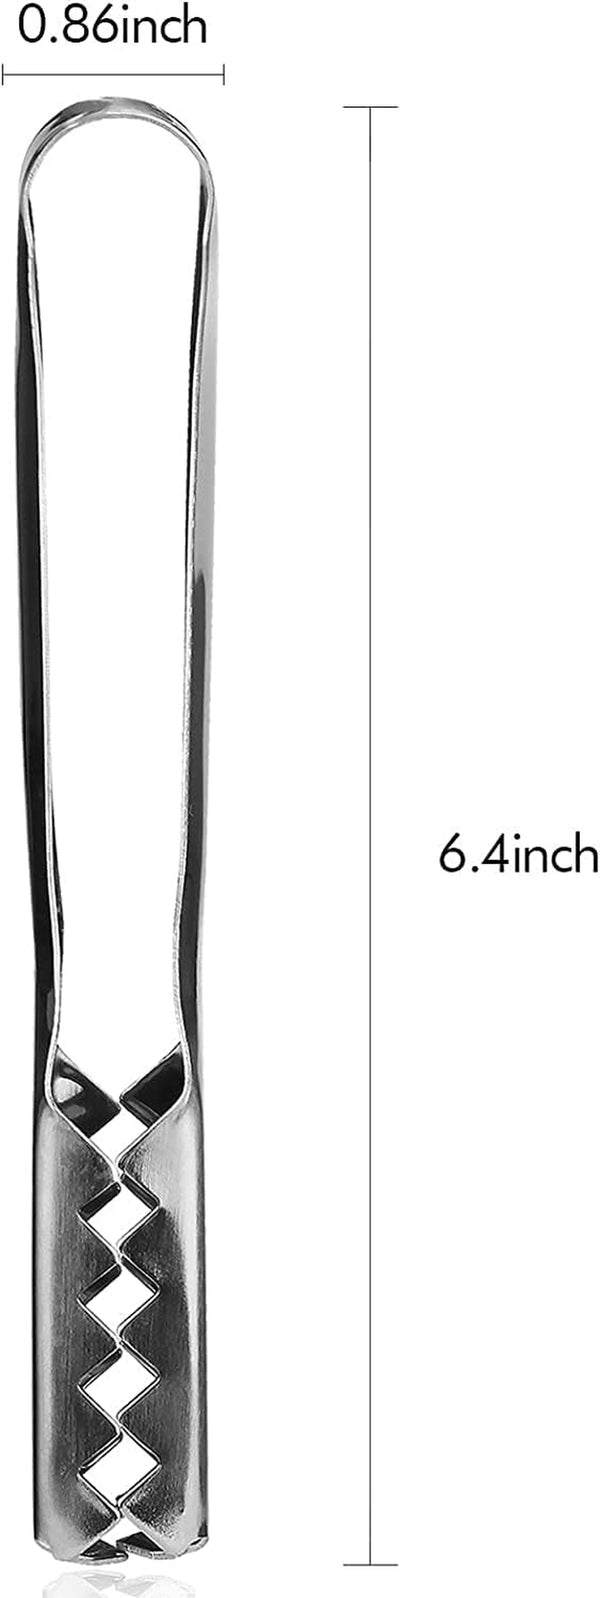 Stainless Steel Ice Cube Tongs, Ice Bucket Ice Cube Mini Serving Tongs for Cocktails Whiskeys, Ice Bucket, Ice Sugar Cubes, Kitchen/Appetizers Tongs for Coffee Bar